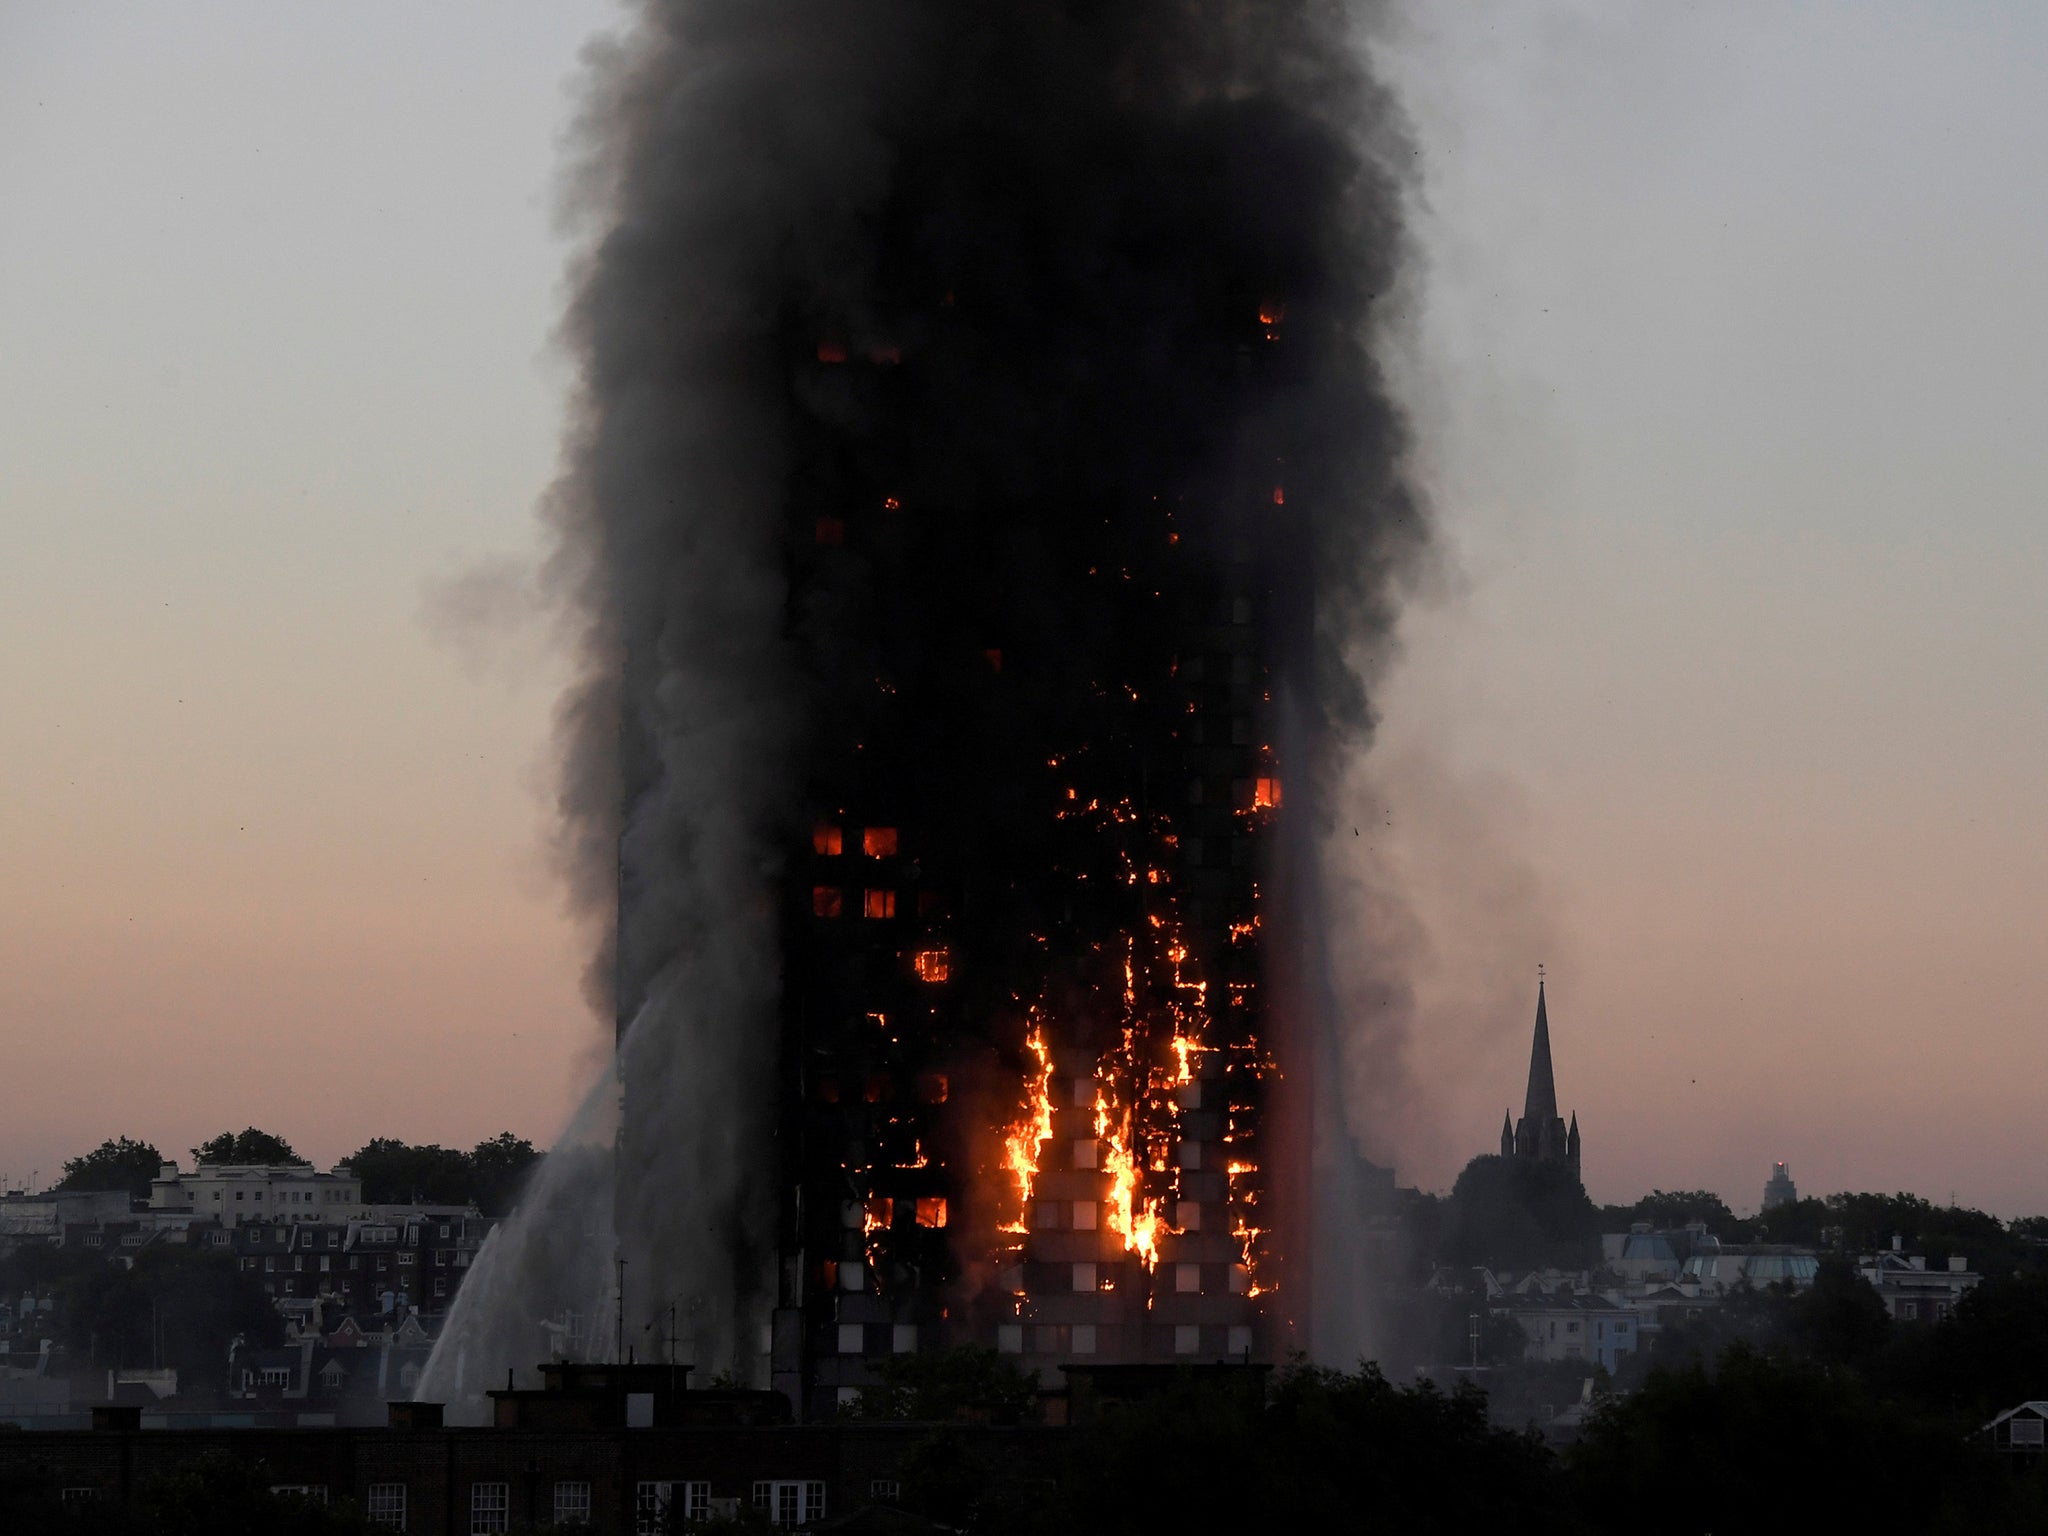 Crowdfunding sites have been criticised for taking money out of public campaigns for tragedies like Grenfell Tower and the Westminster terror attack